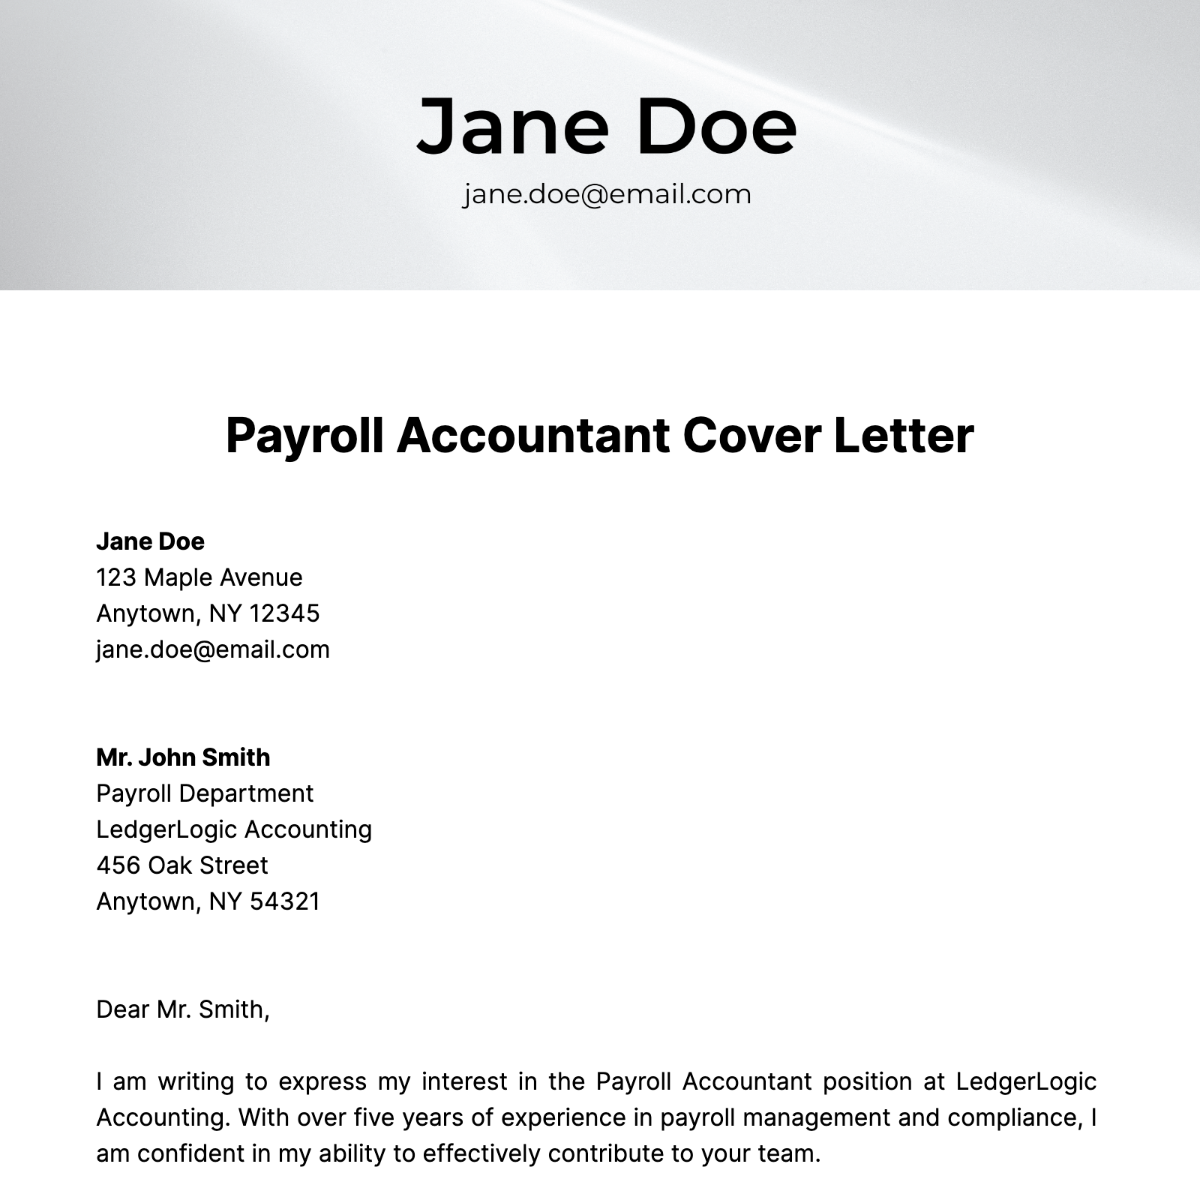 Payroll Accountant Cover Letter Template